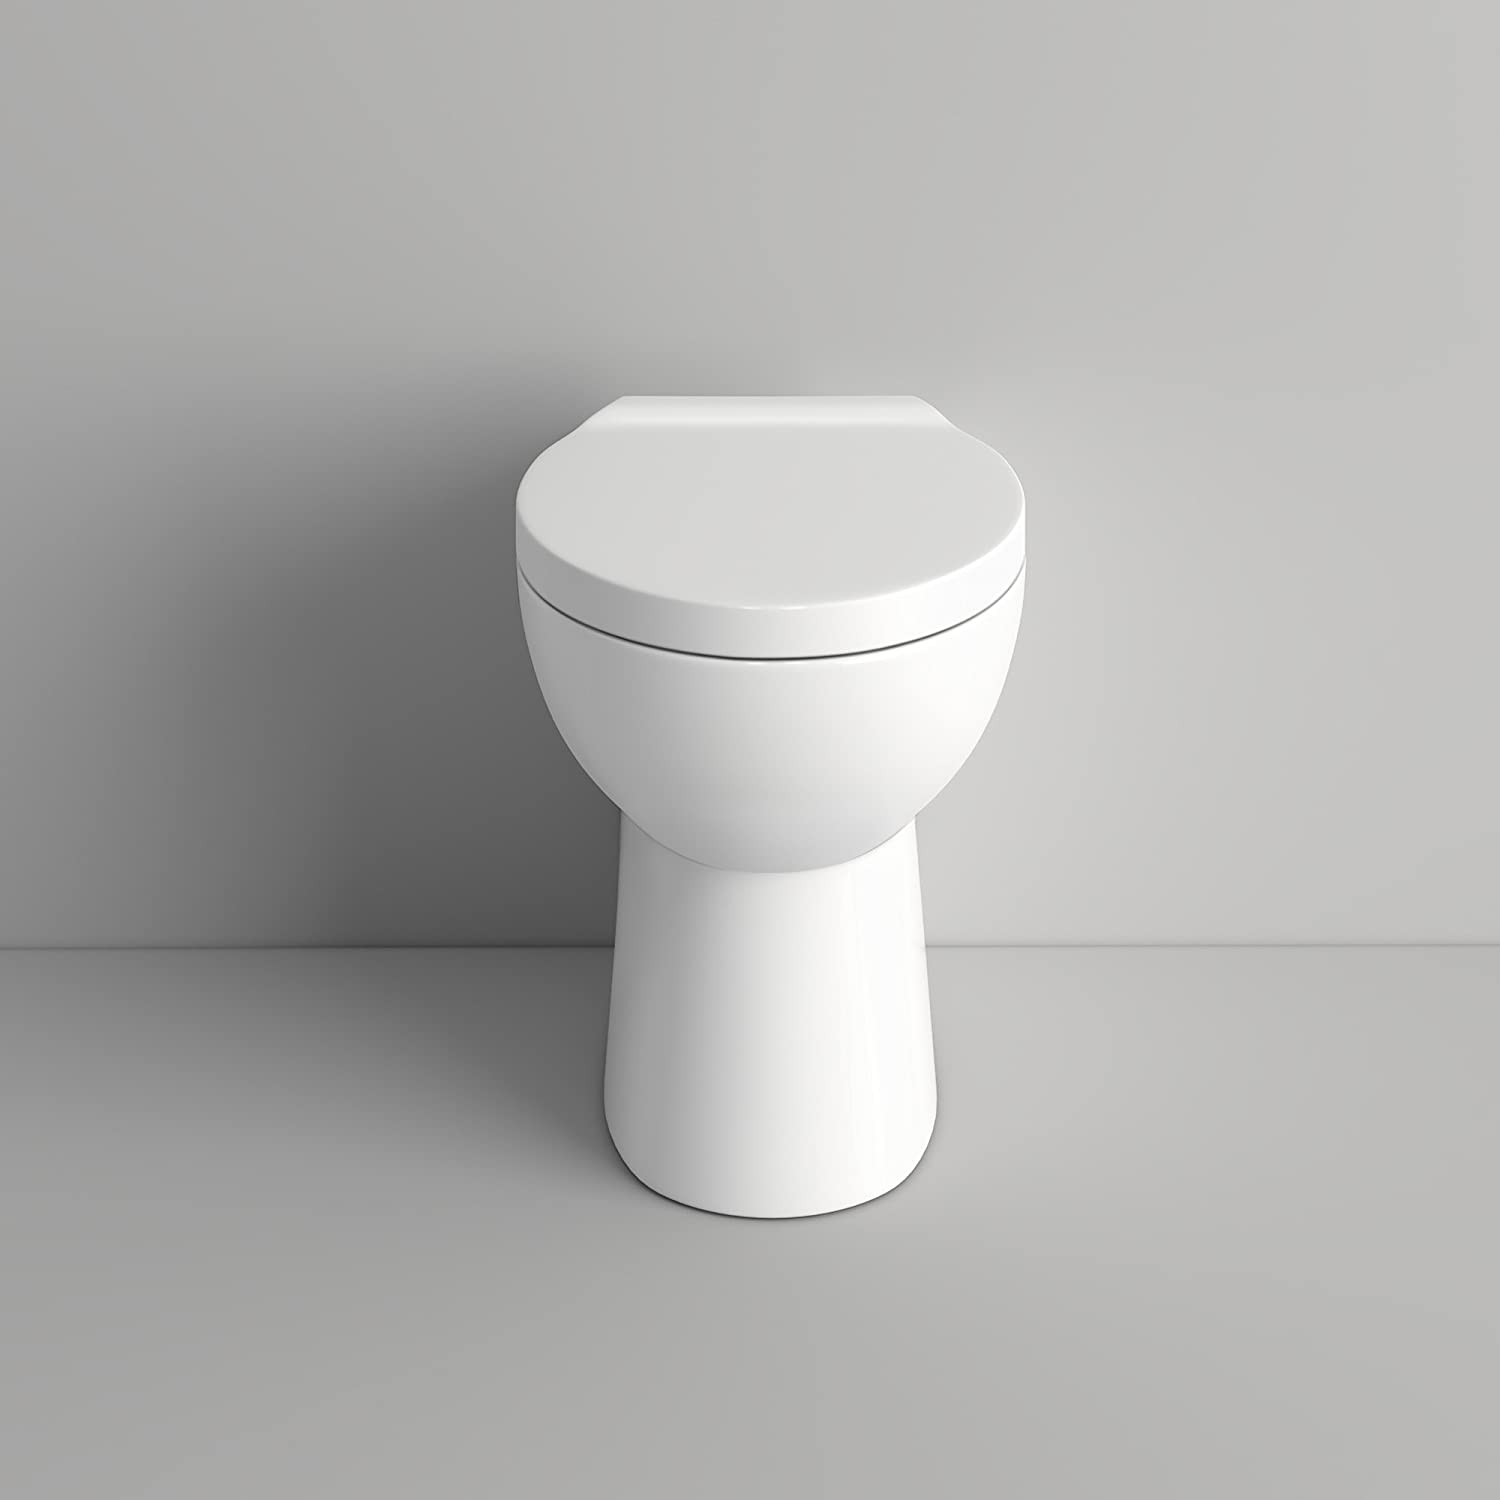 Basics Back To Wall Toilet With Soft Close Seat - Gloss White